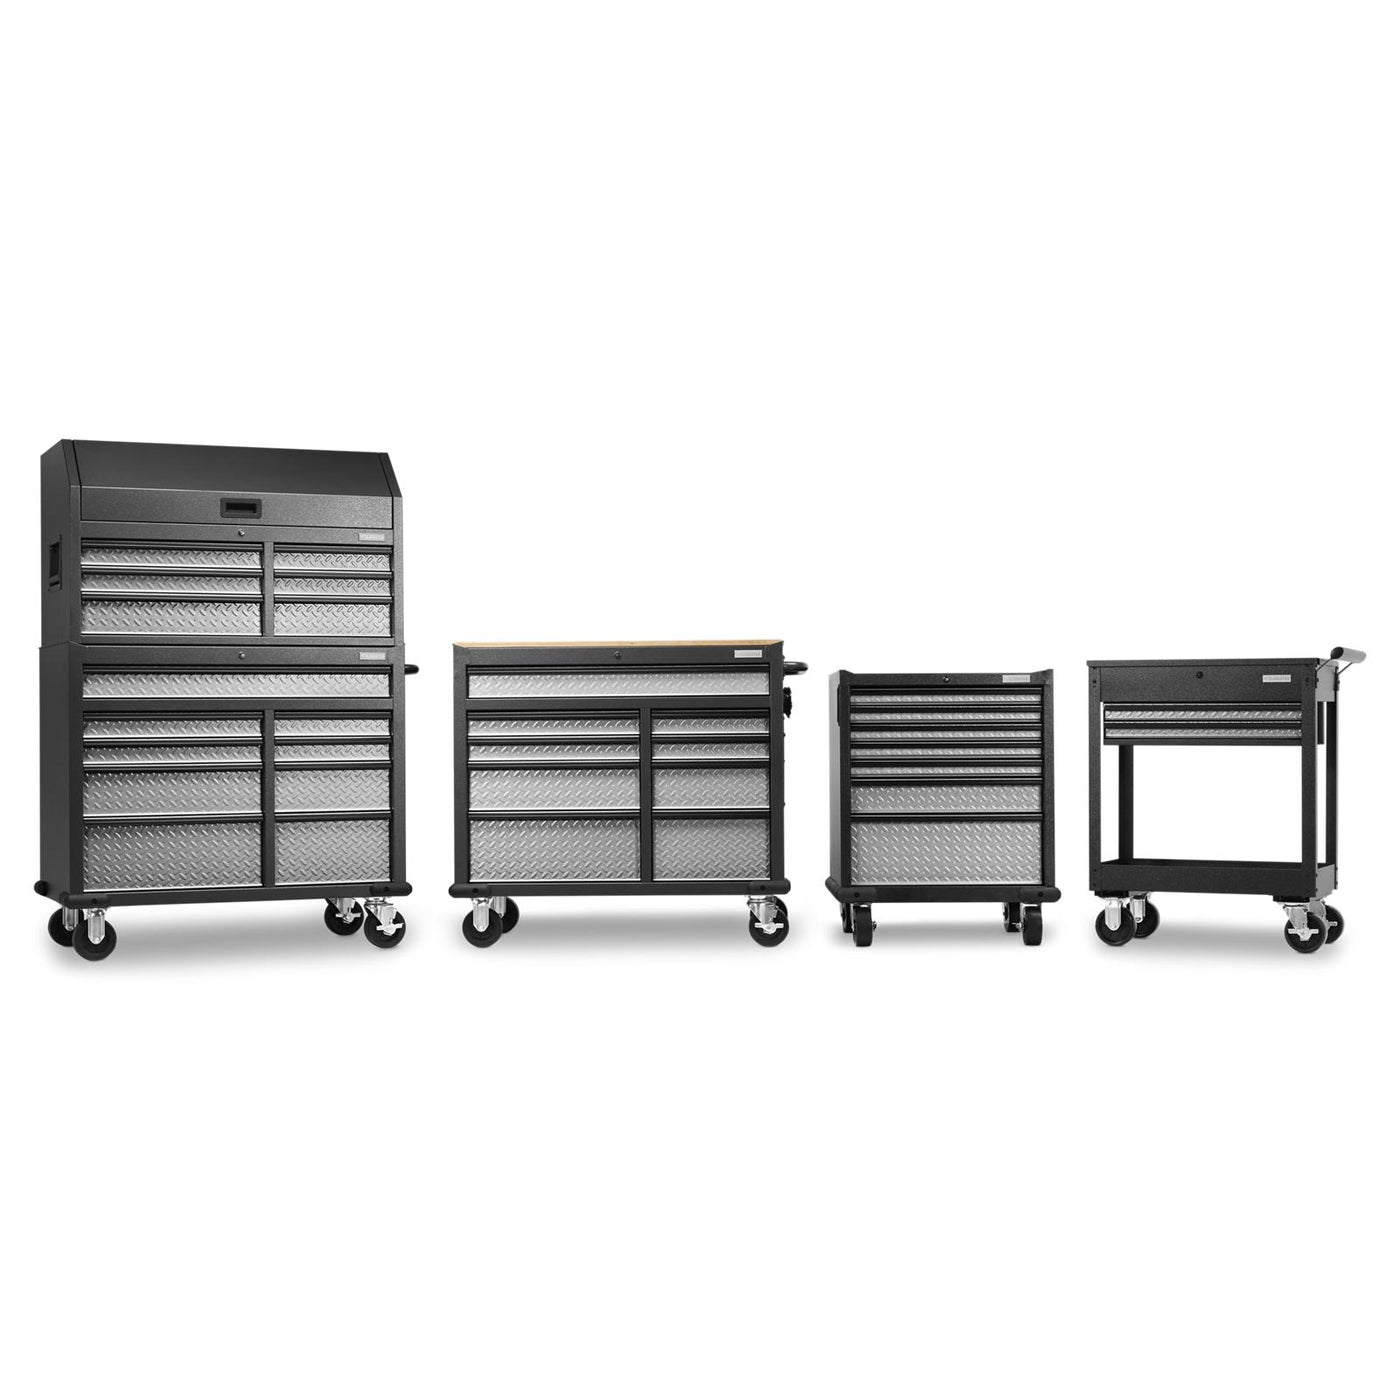 Gladiator Silver Tread Premier 41 inch 9-drawer Mobile Tool Workbench with Solid Wood Top - GAMT41HWJG